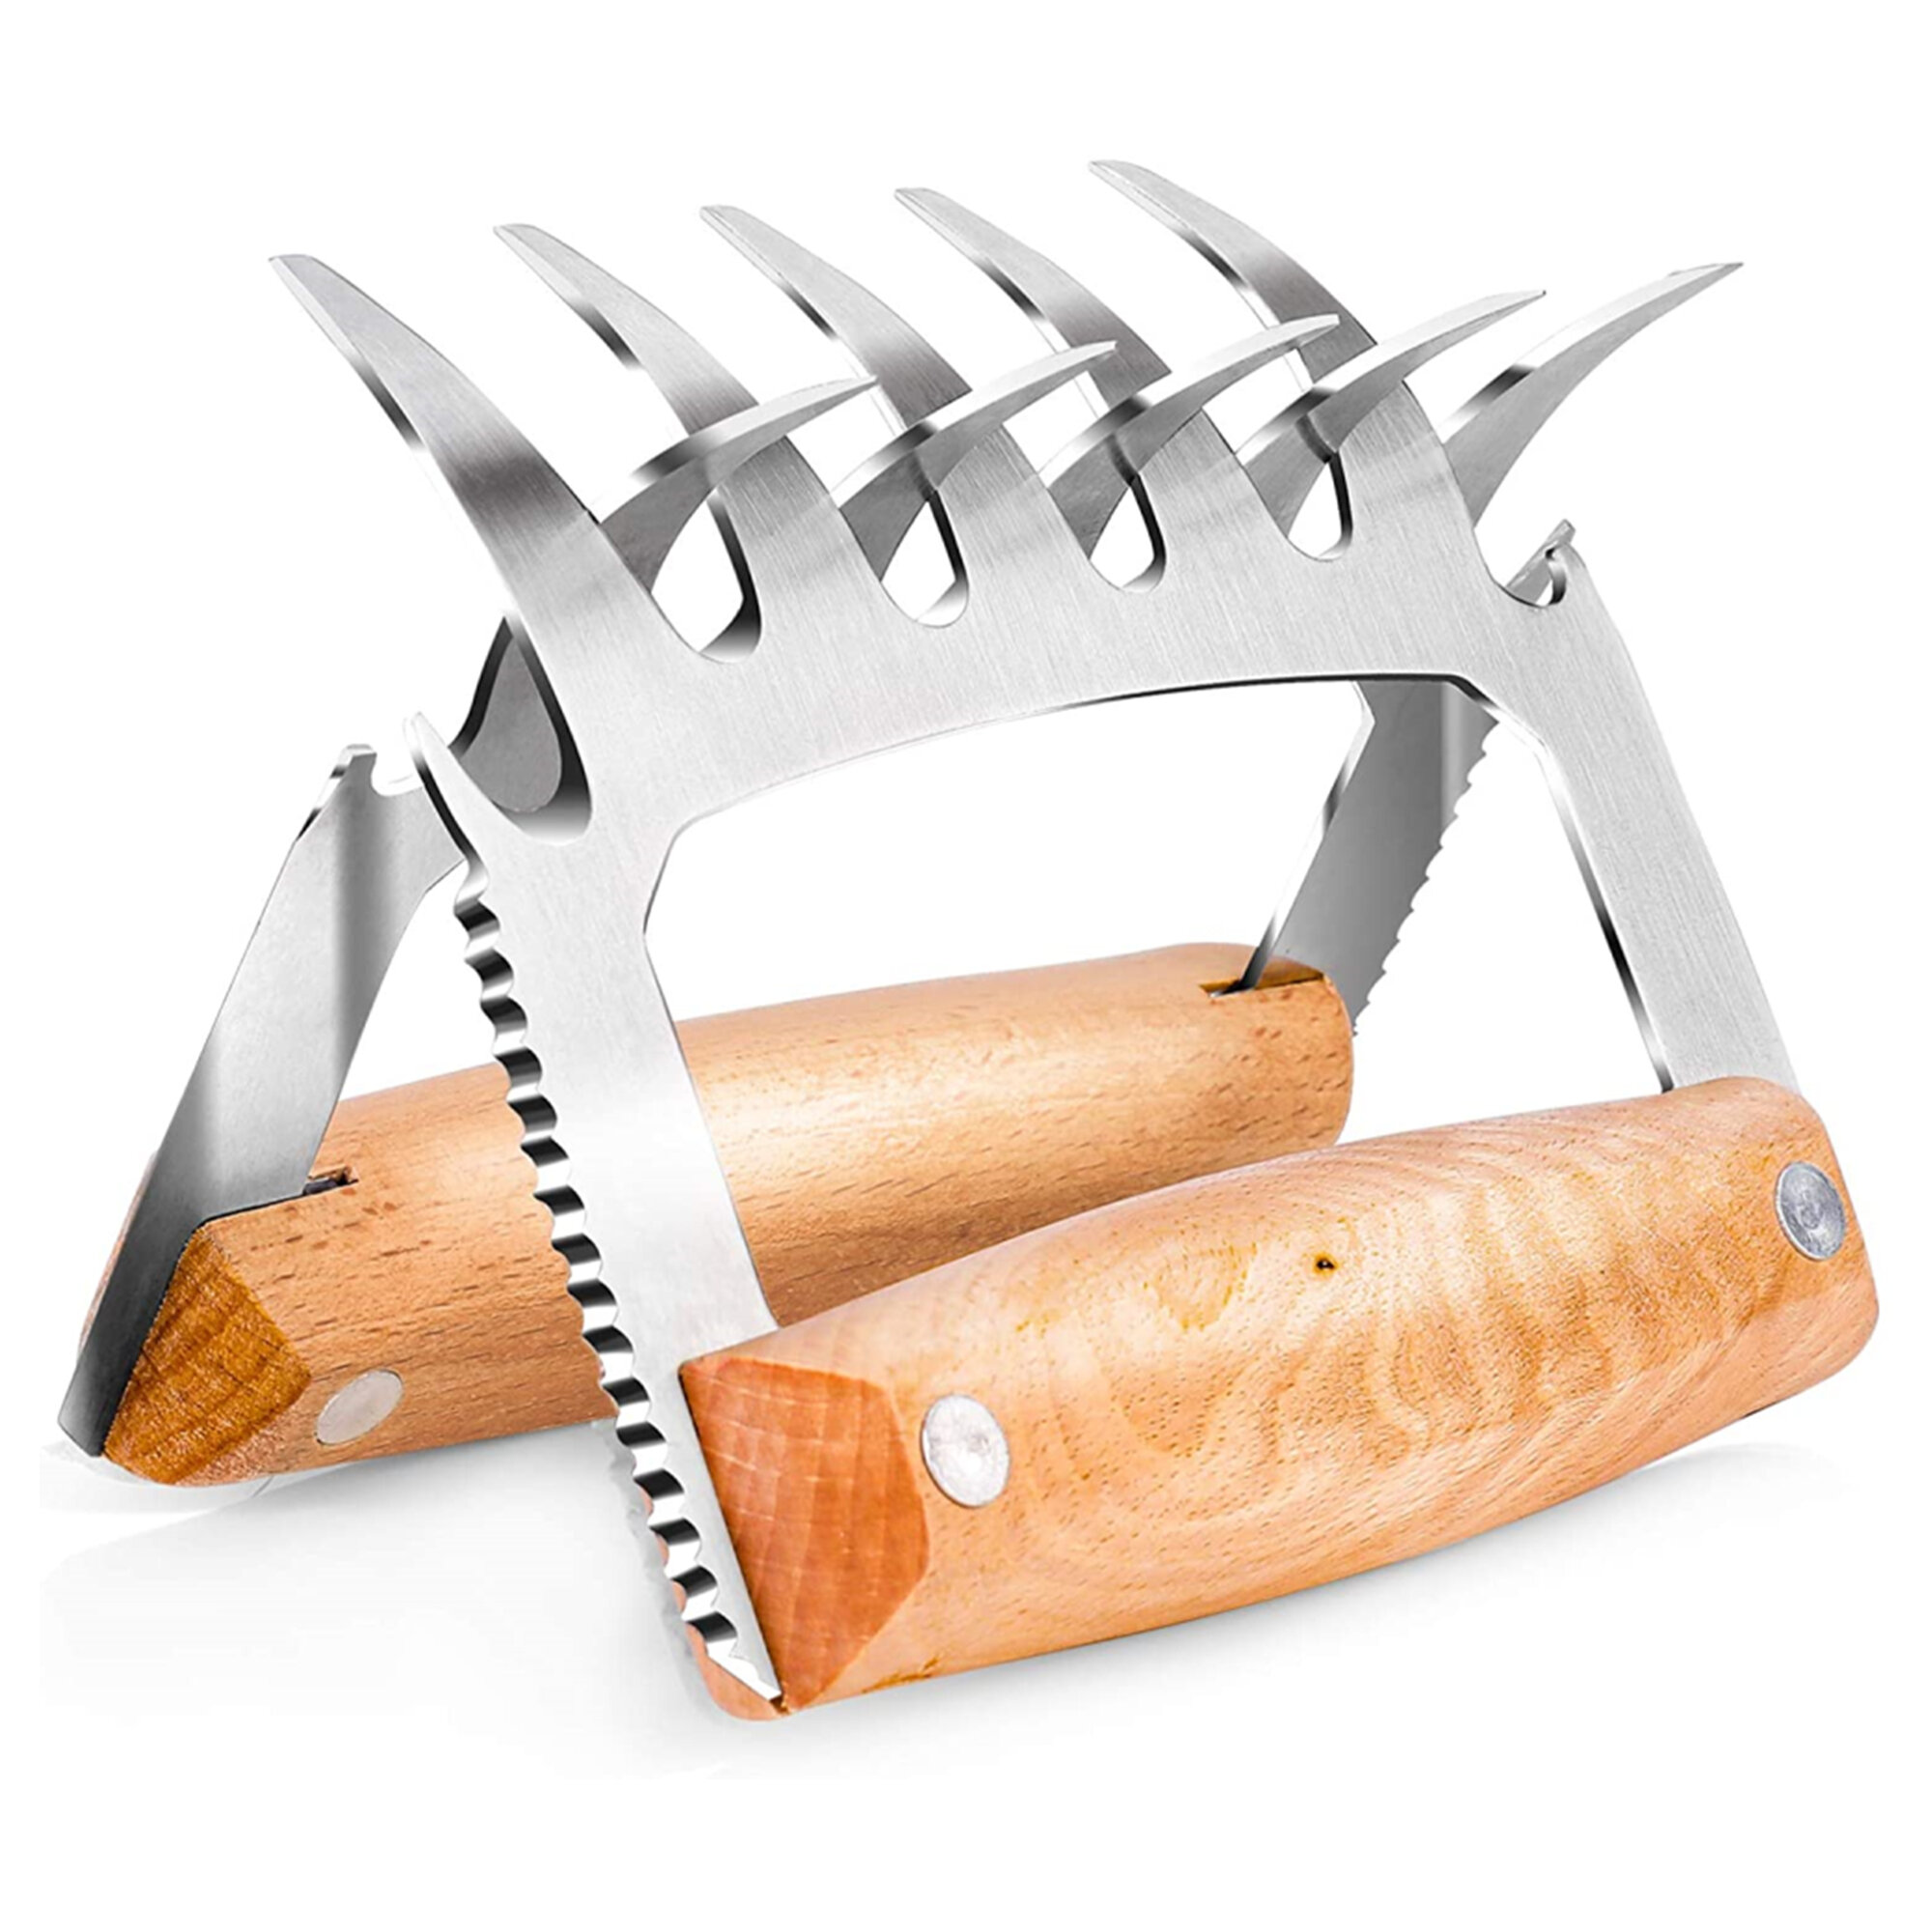 Stainless Steel Barbecue Claws Set of 2 Metal Bear Meat Claws for Shredding